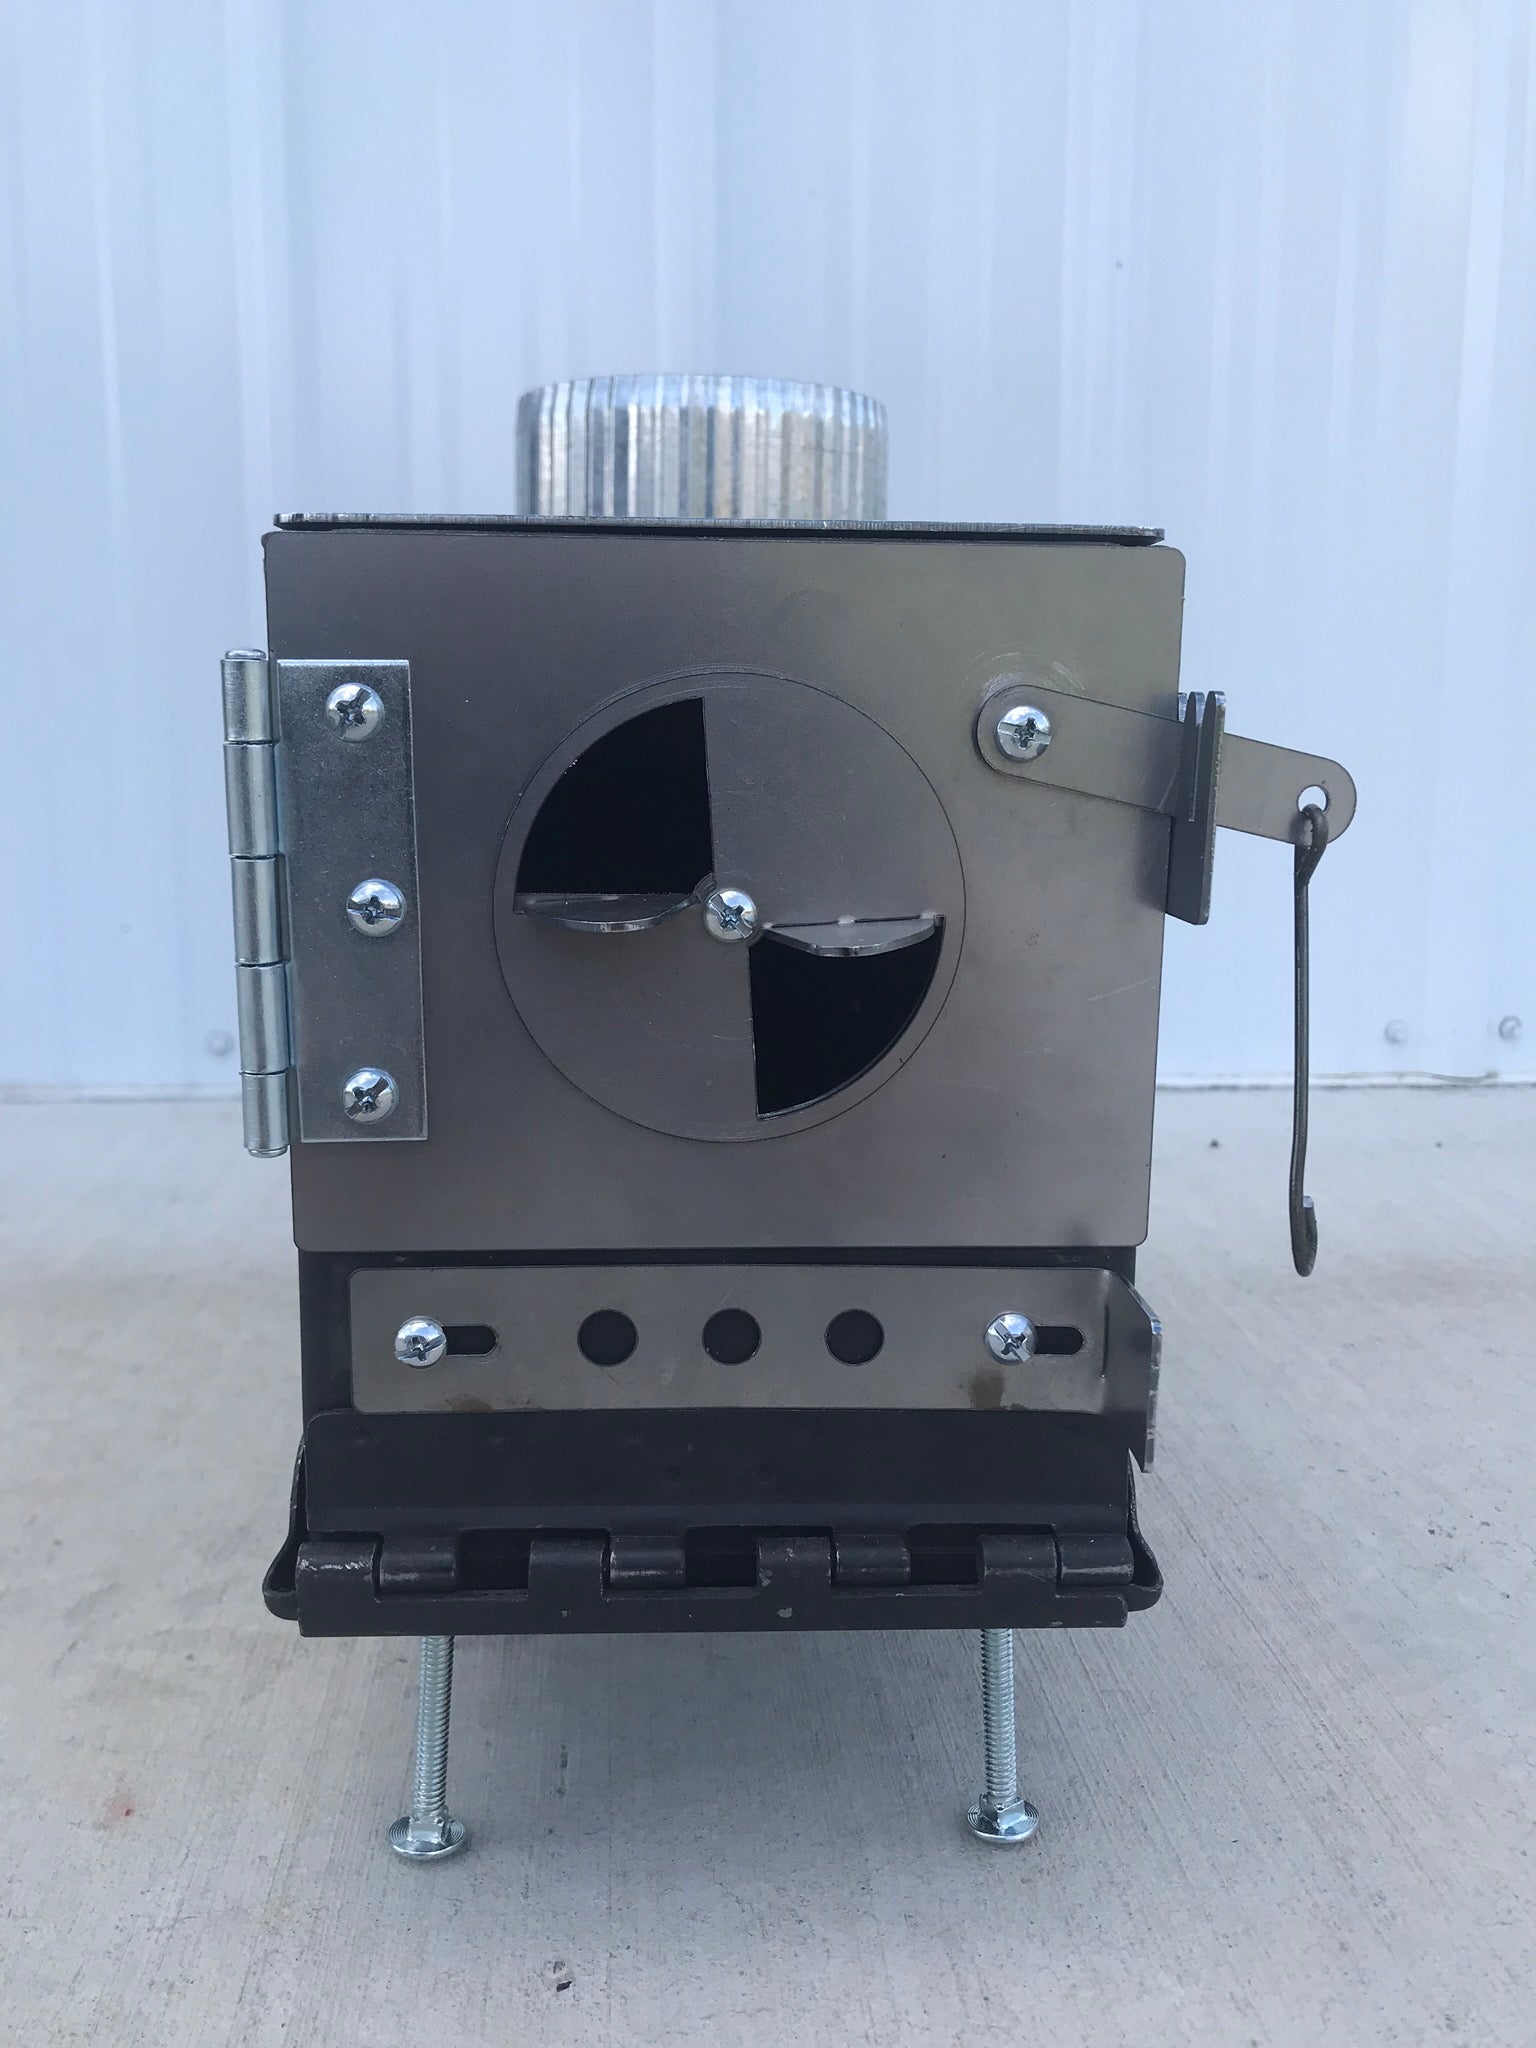 Ammo Can Stove Kit DIY – PackAFlame